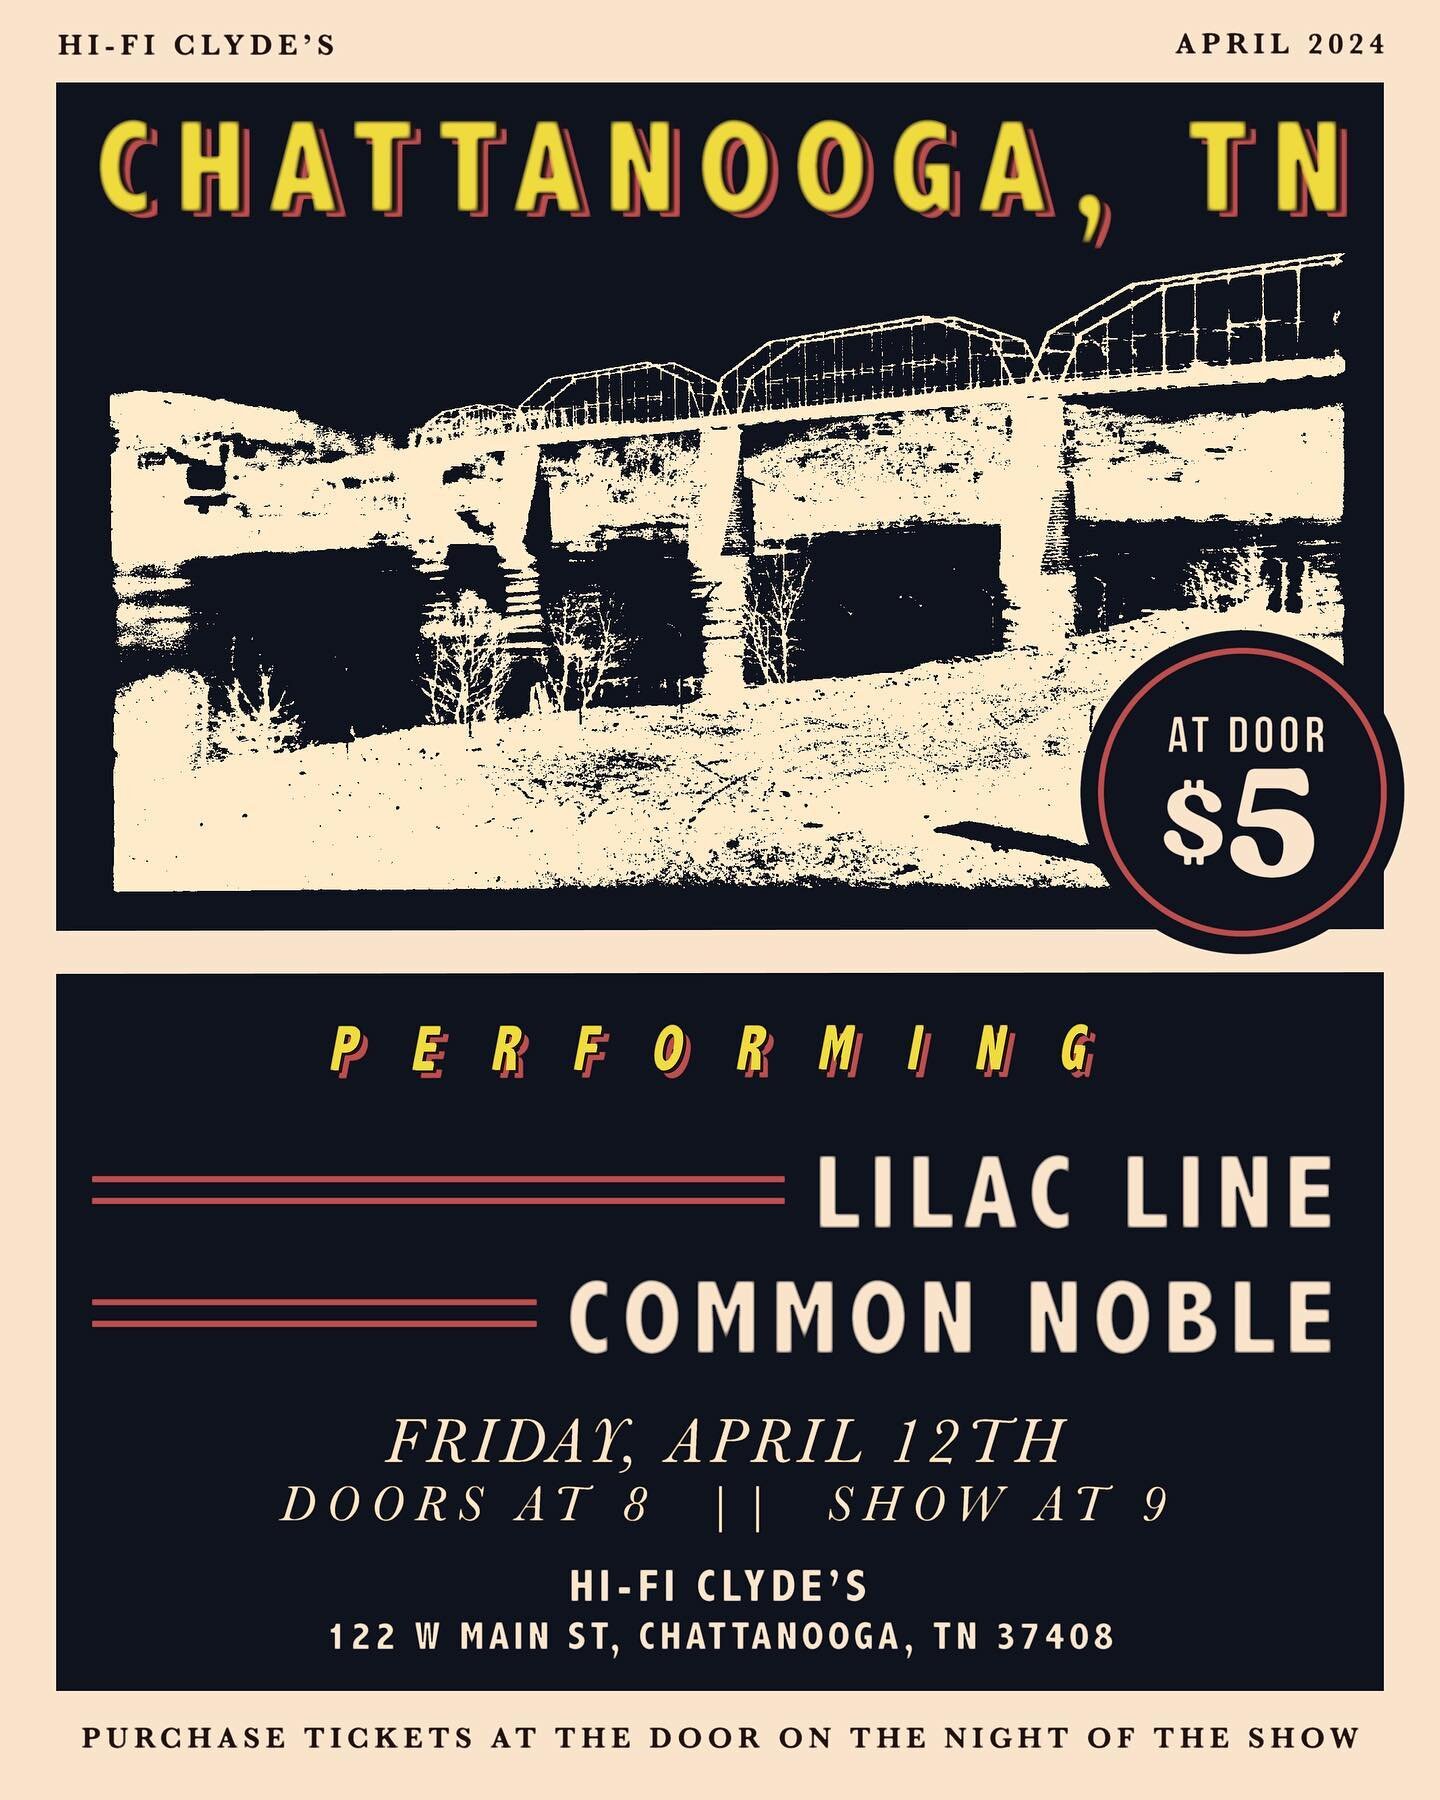 CHATTANOOGA UP NEXT
Back at it with the boys. We&rsquo;ll be rolling up to @hificlydeschatt with @lilaclineofficial on Friday April 12th. Tickets are only $5 (five bucks [🖐🏼💰]) at the door! SEE YOU THERE